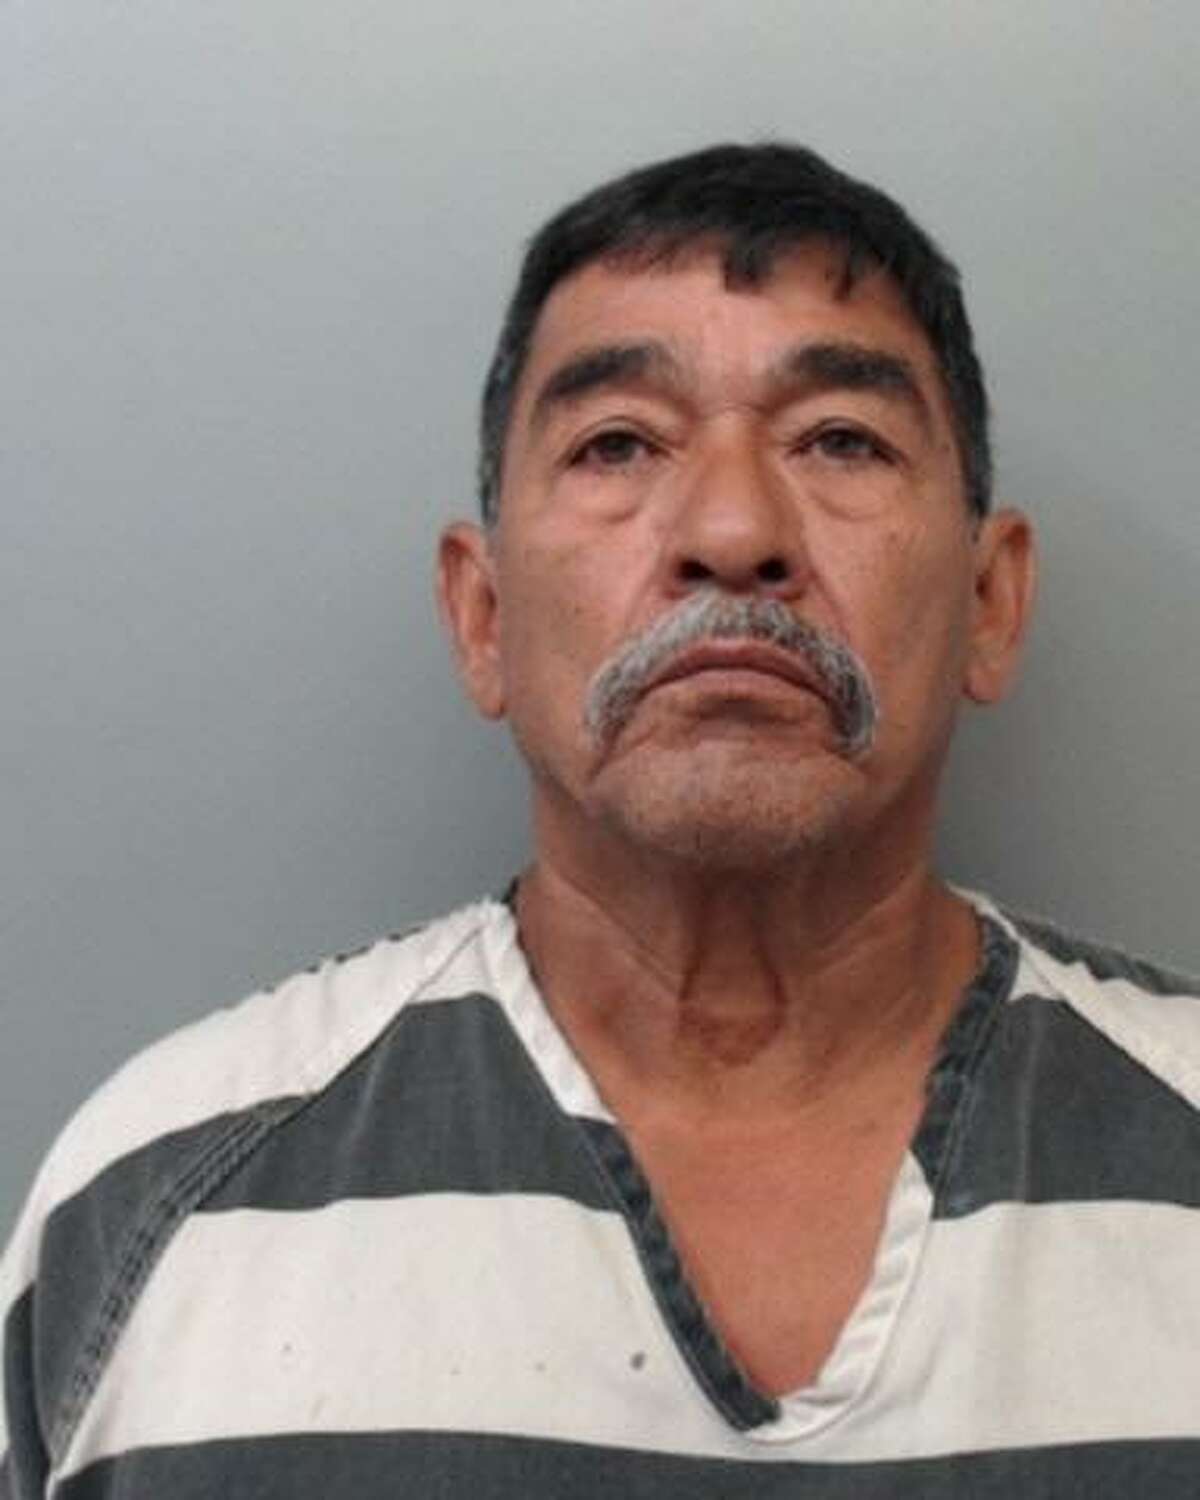 Rodolfo Flores-Ramos, 62, was charged with displaying harmful material to a minor.